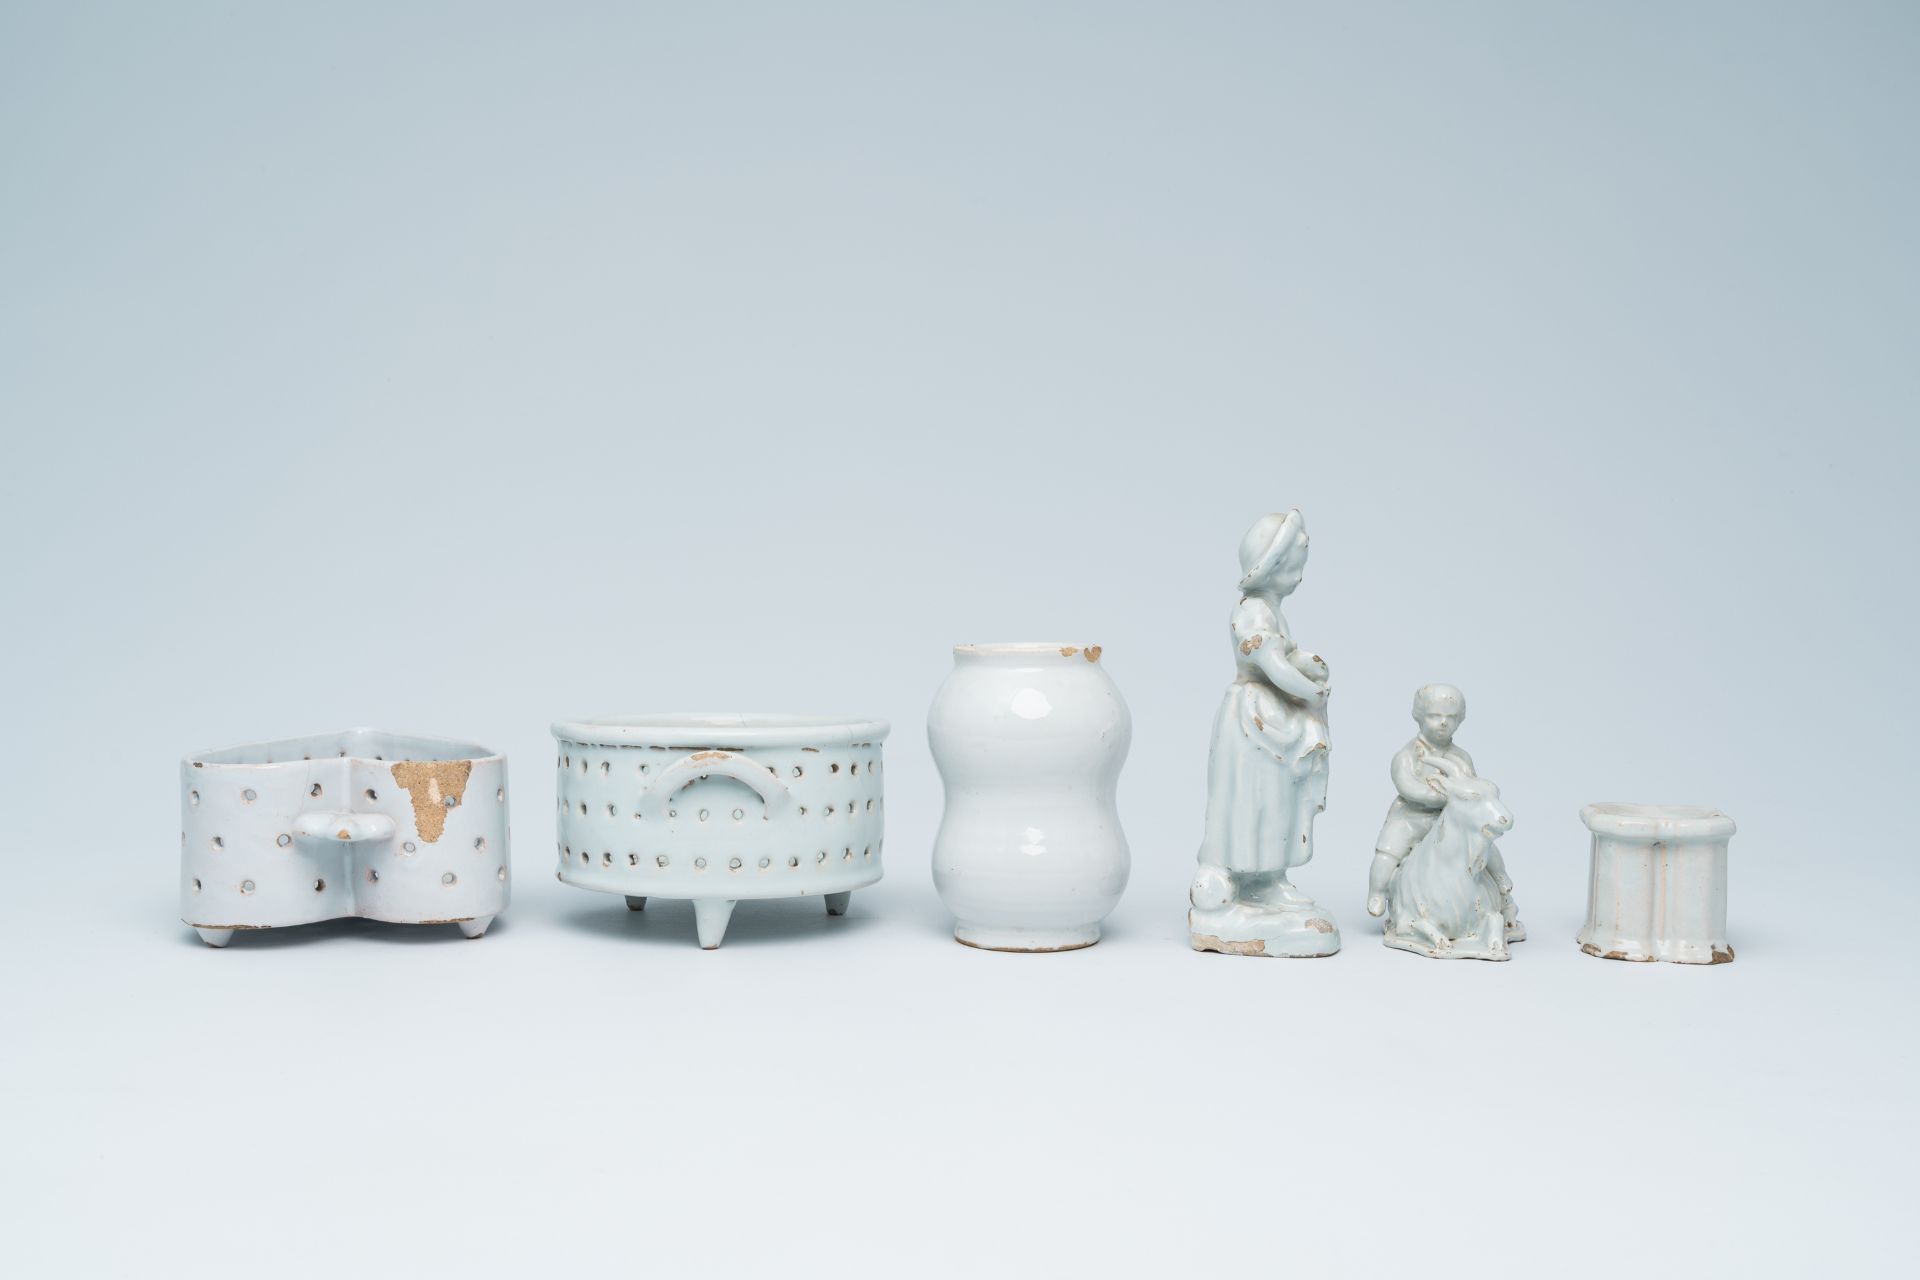 Six monochrome white Delftware pieces, The Netherlands and France, 18th/19th C. - Image 4 of 7